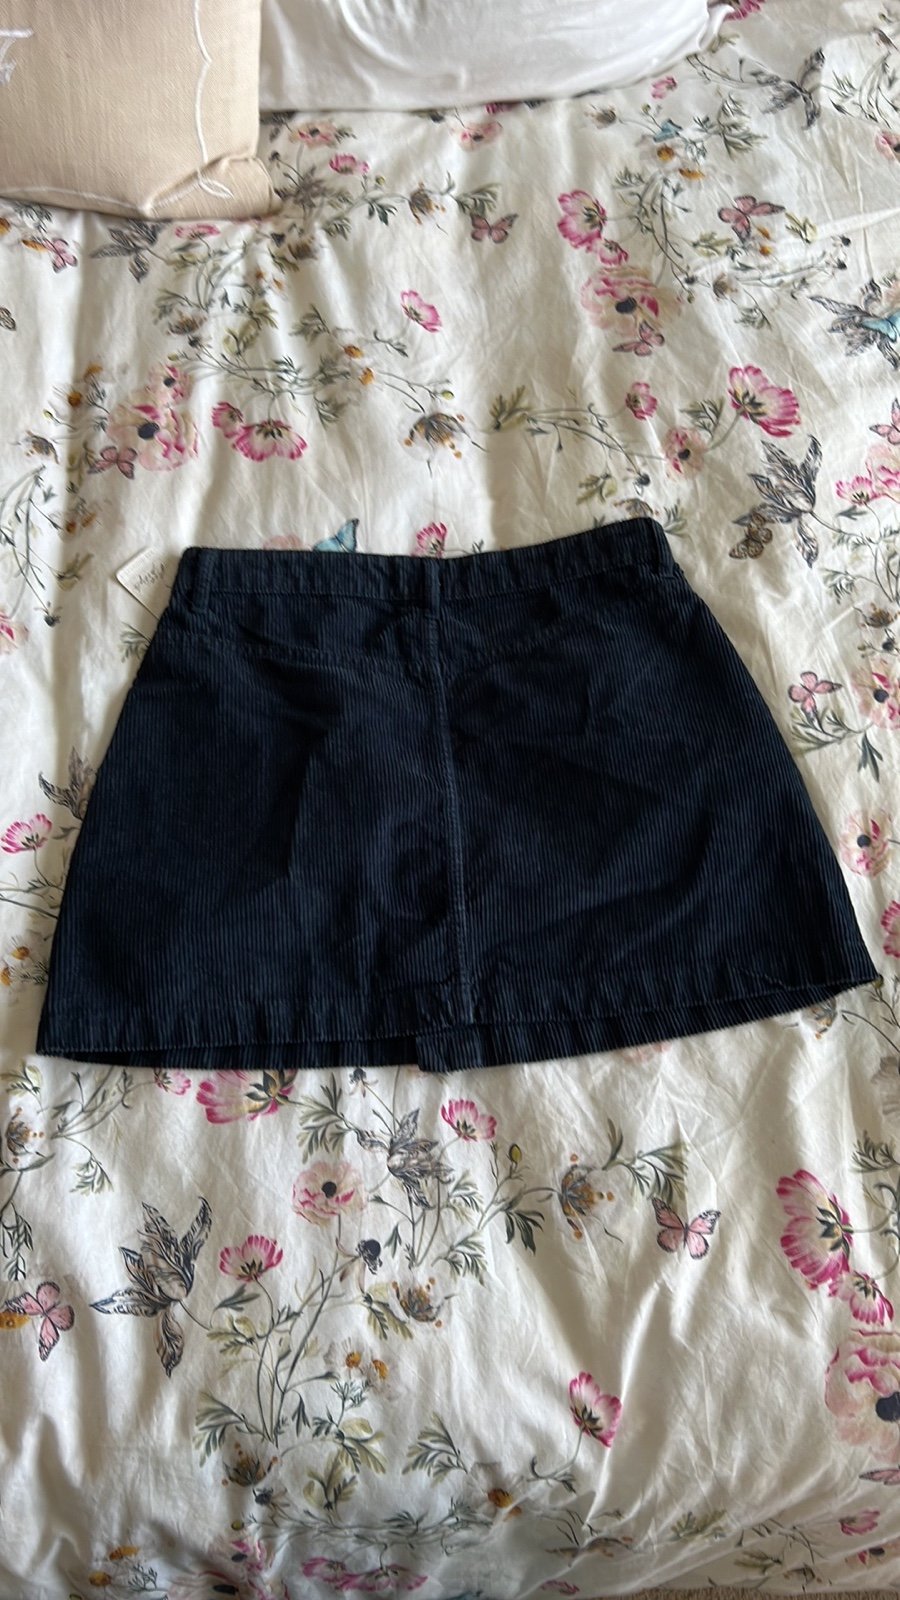 where to buy  Free People Corduroy Skirt pN02MgypP just buy it